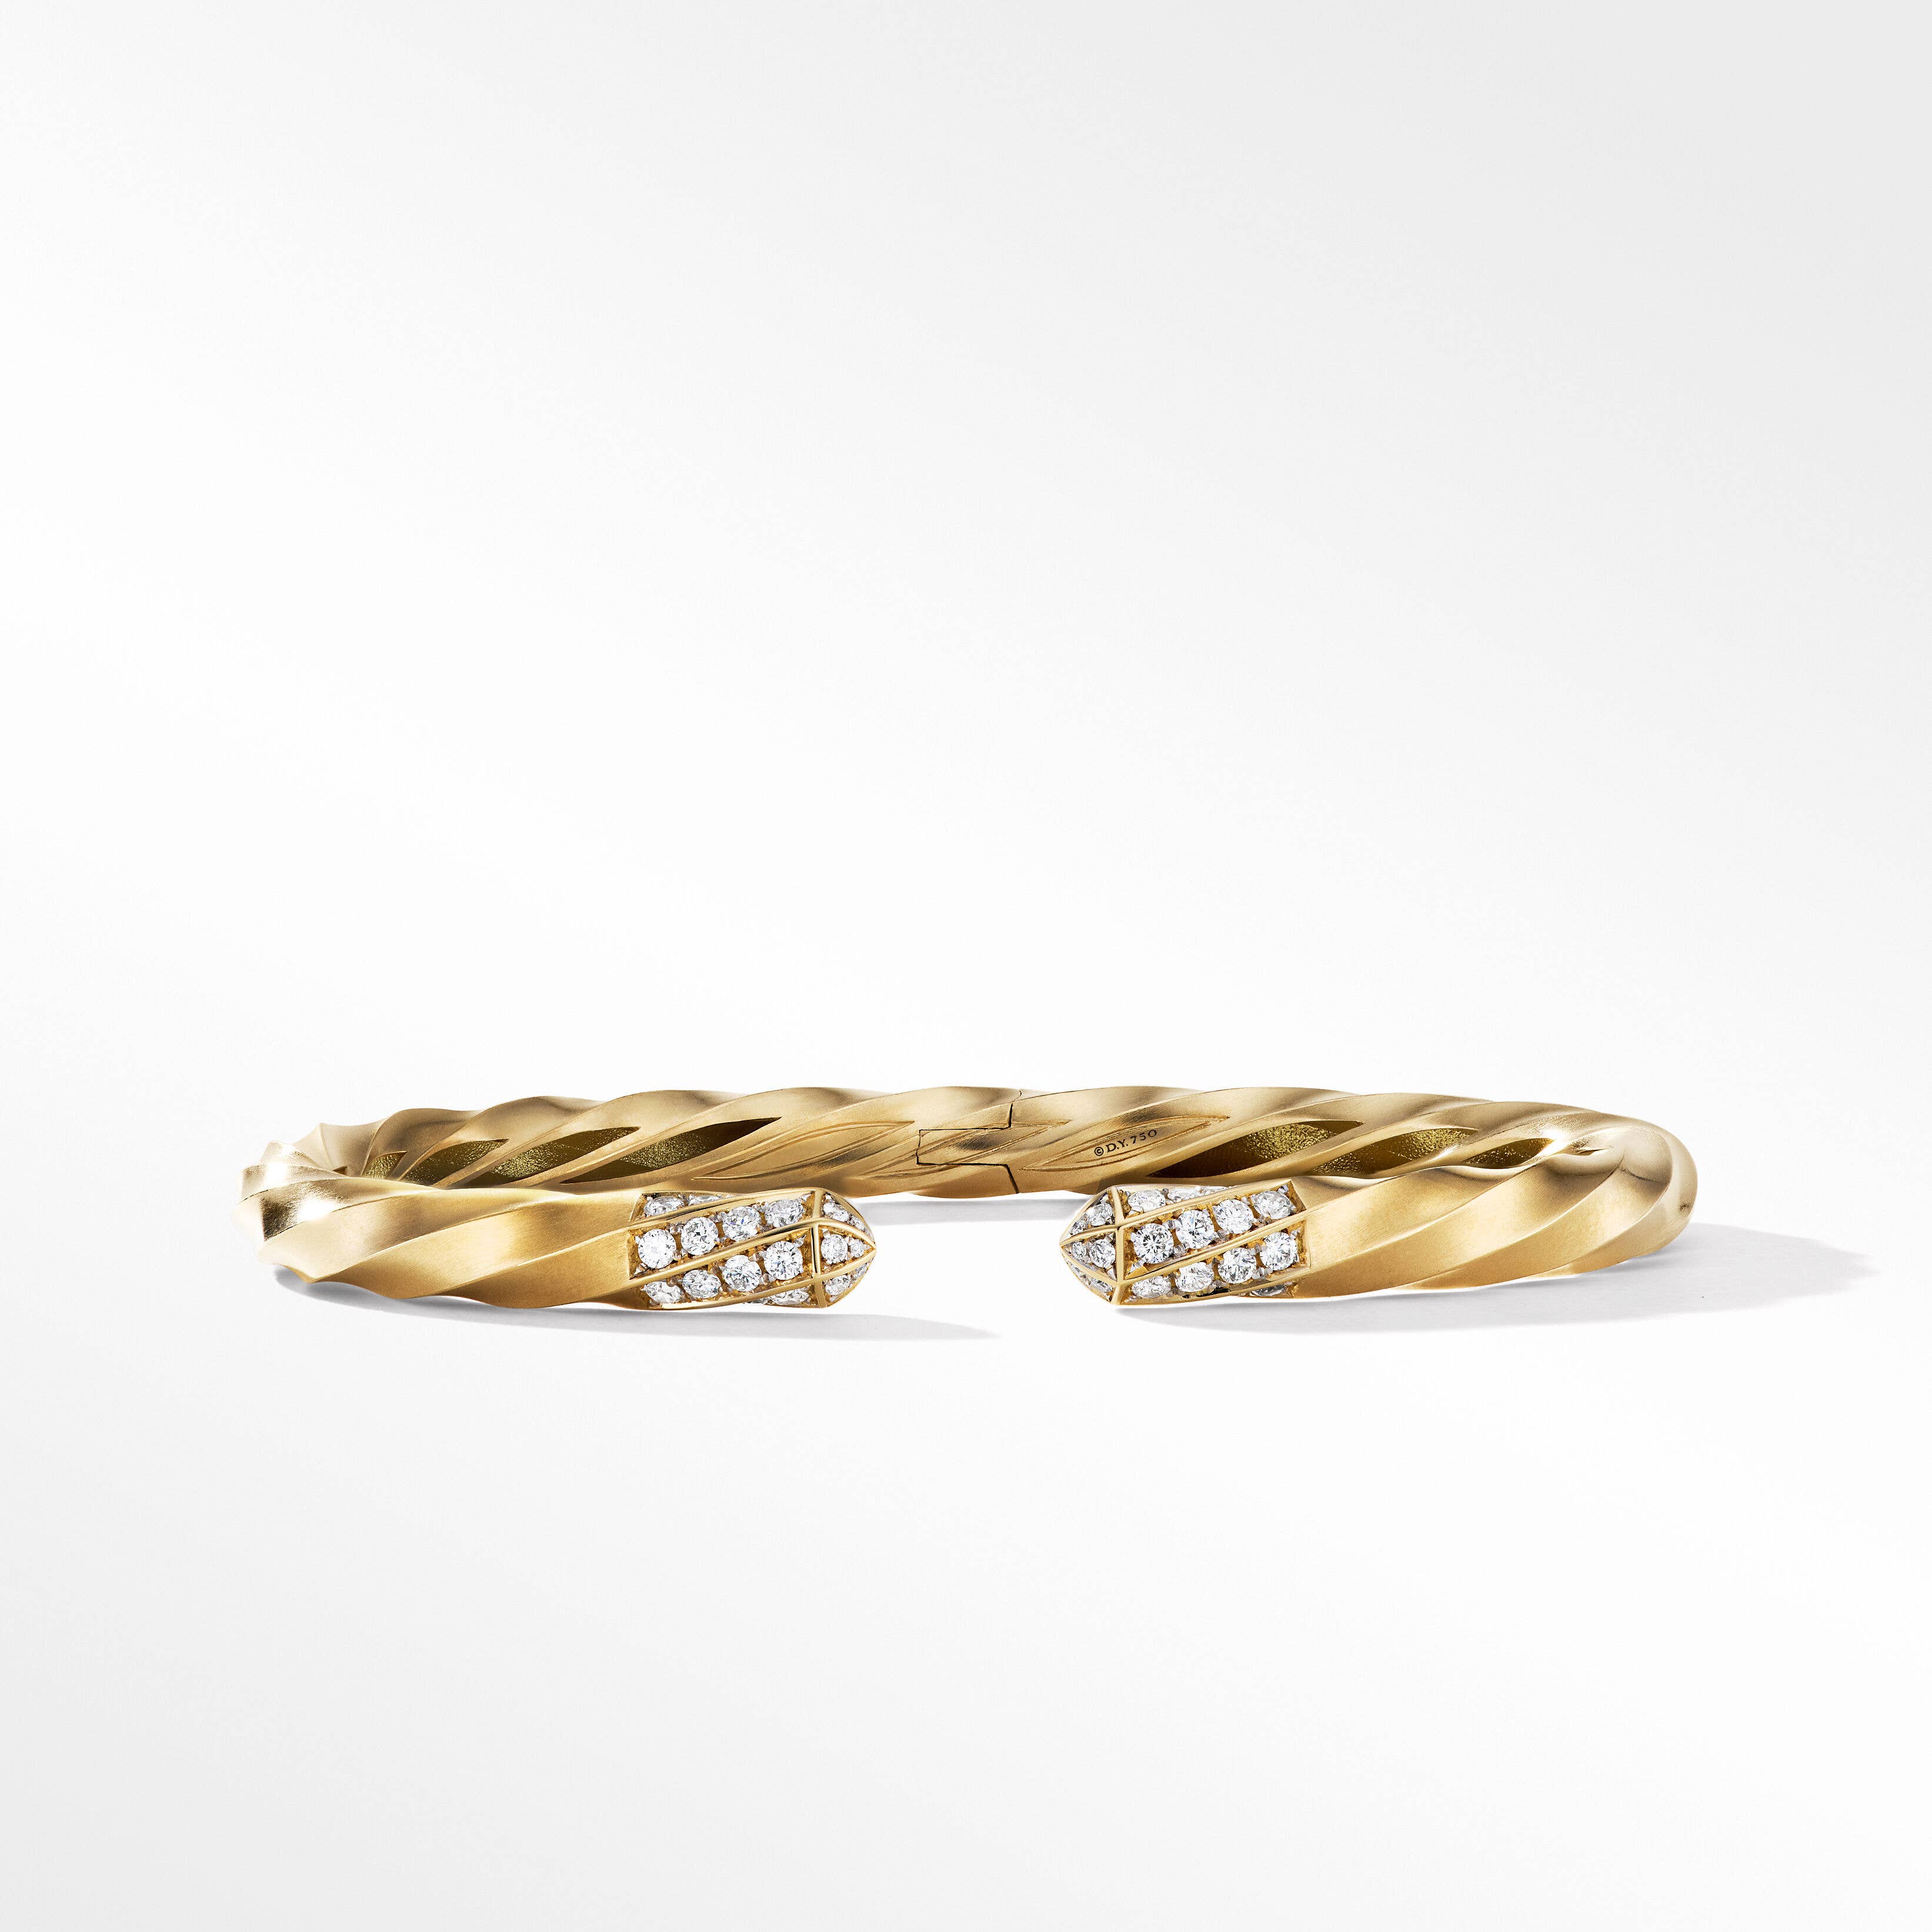 Cable Edge Bracelet in Recycled 18K Yellow Gold with Diamonds, 5.5mm